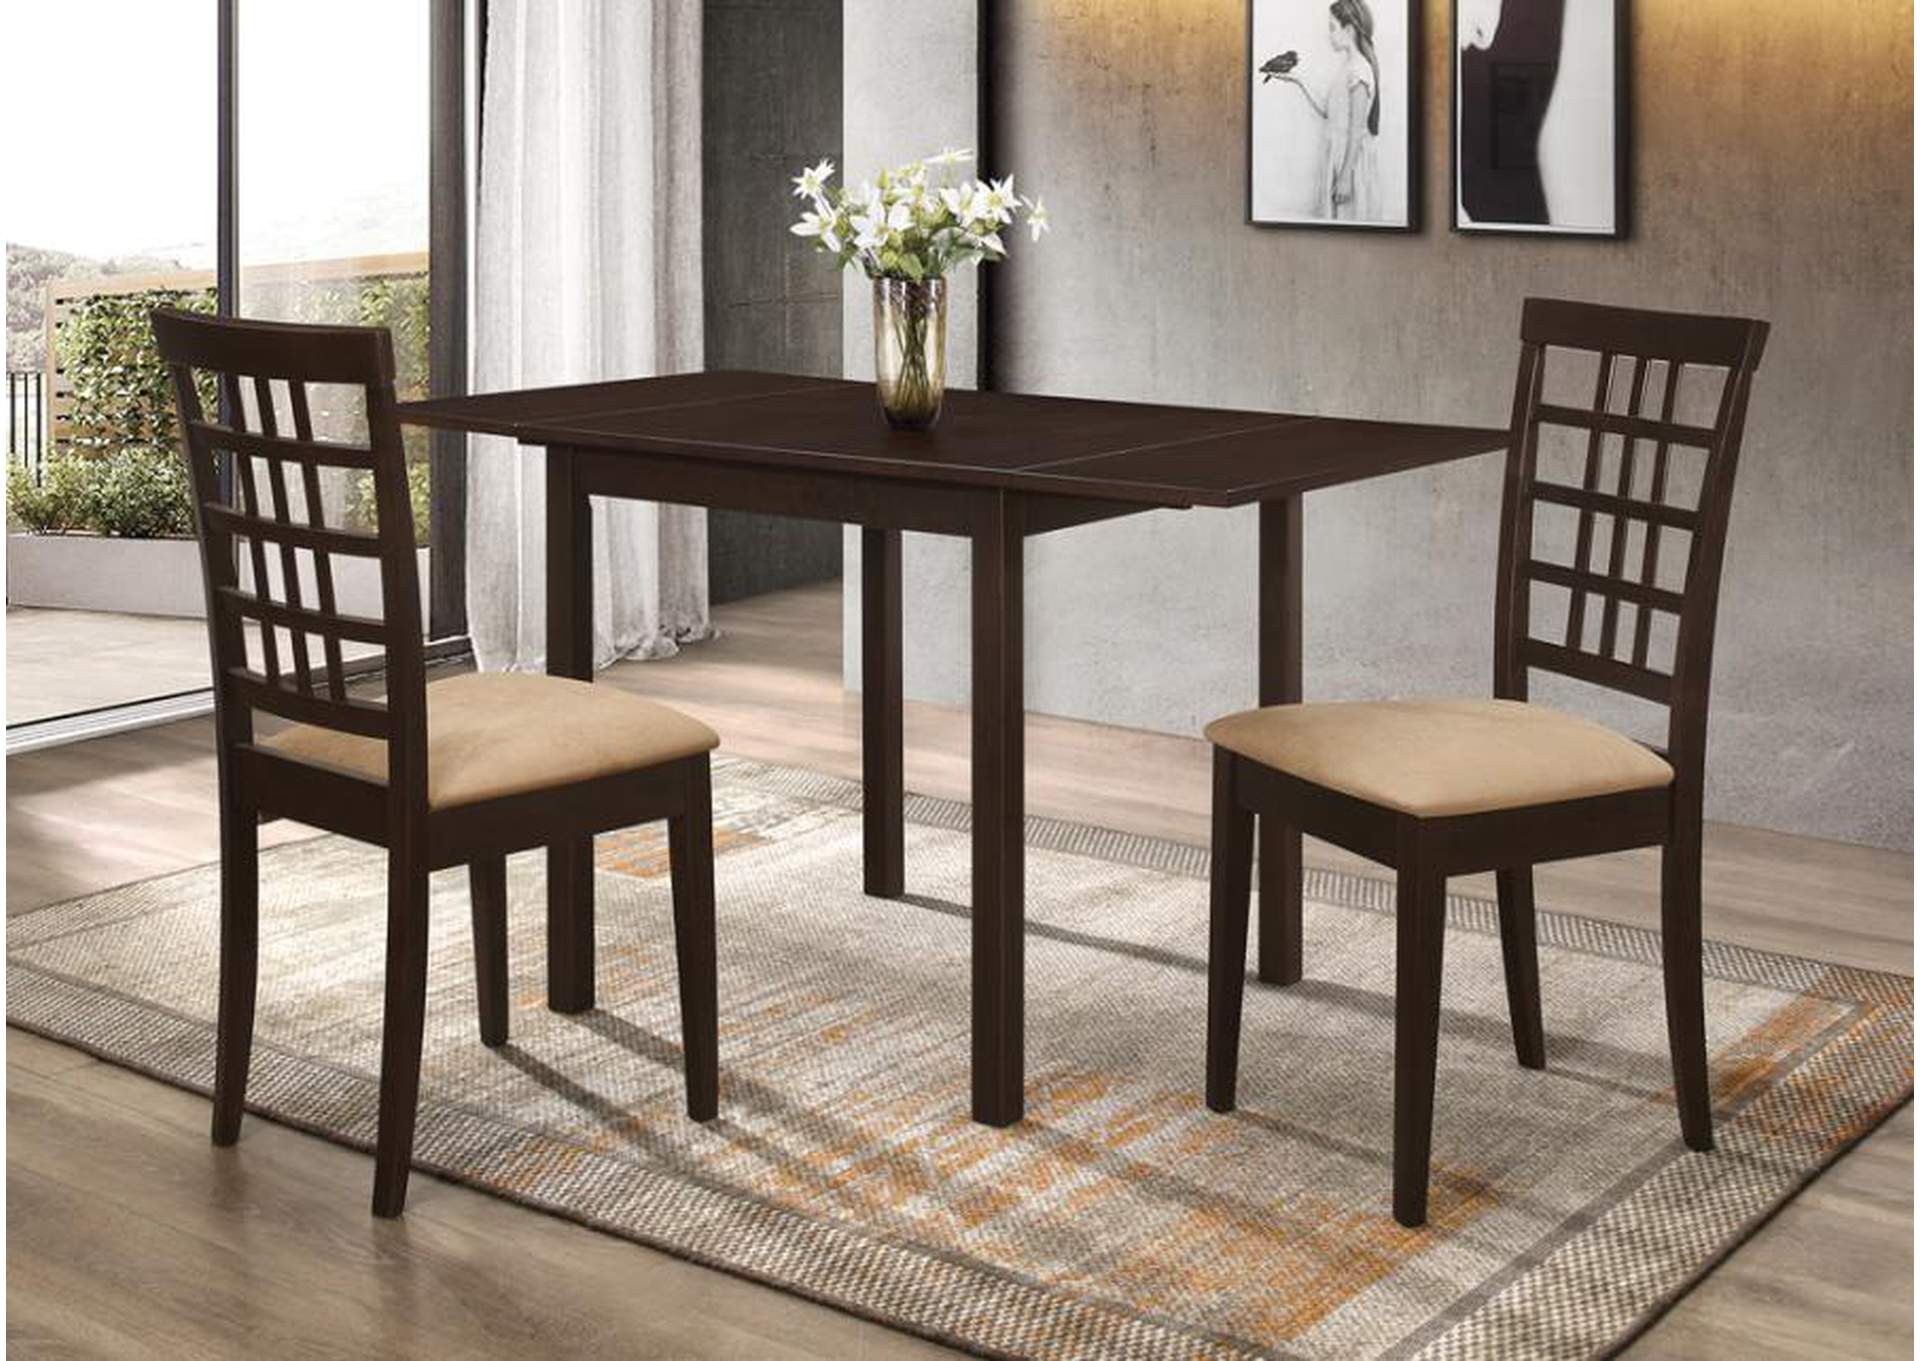 Kelso Rectangular Dining Table With Drop Leaf Cappuccino,Coaster Furniture